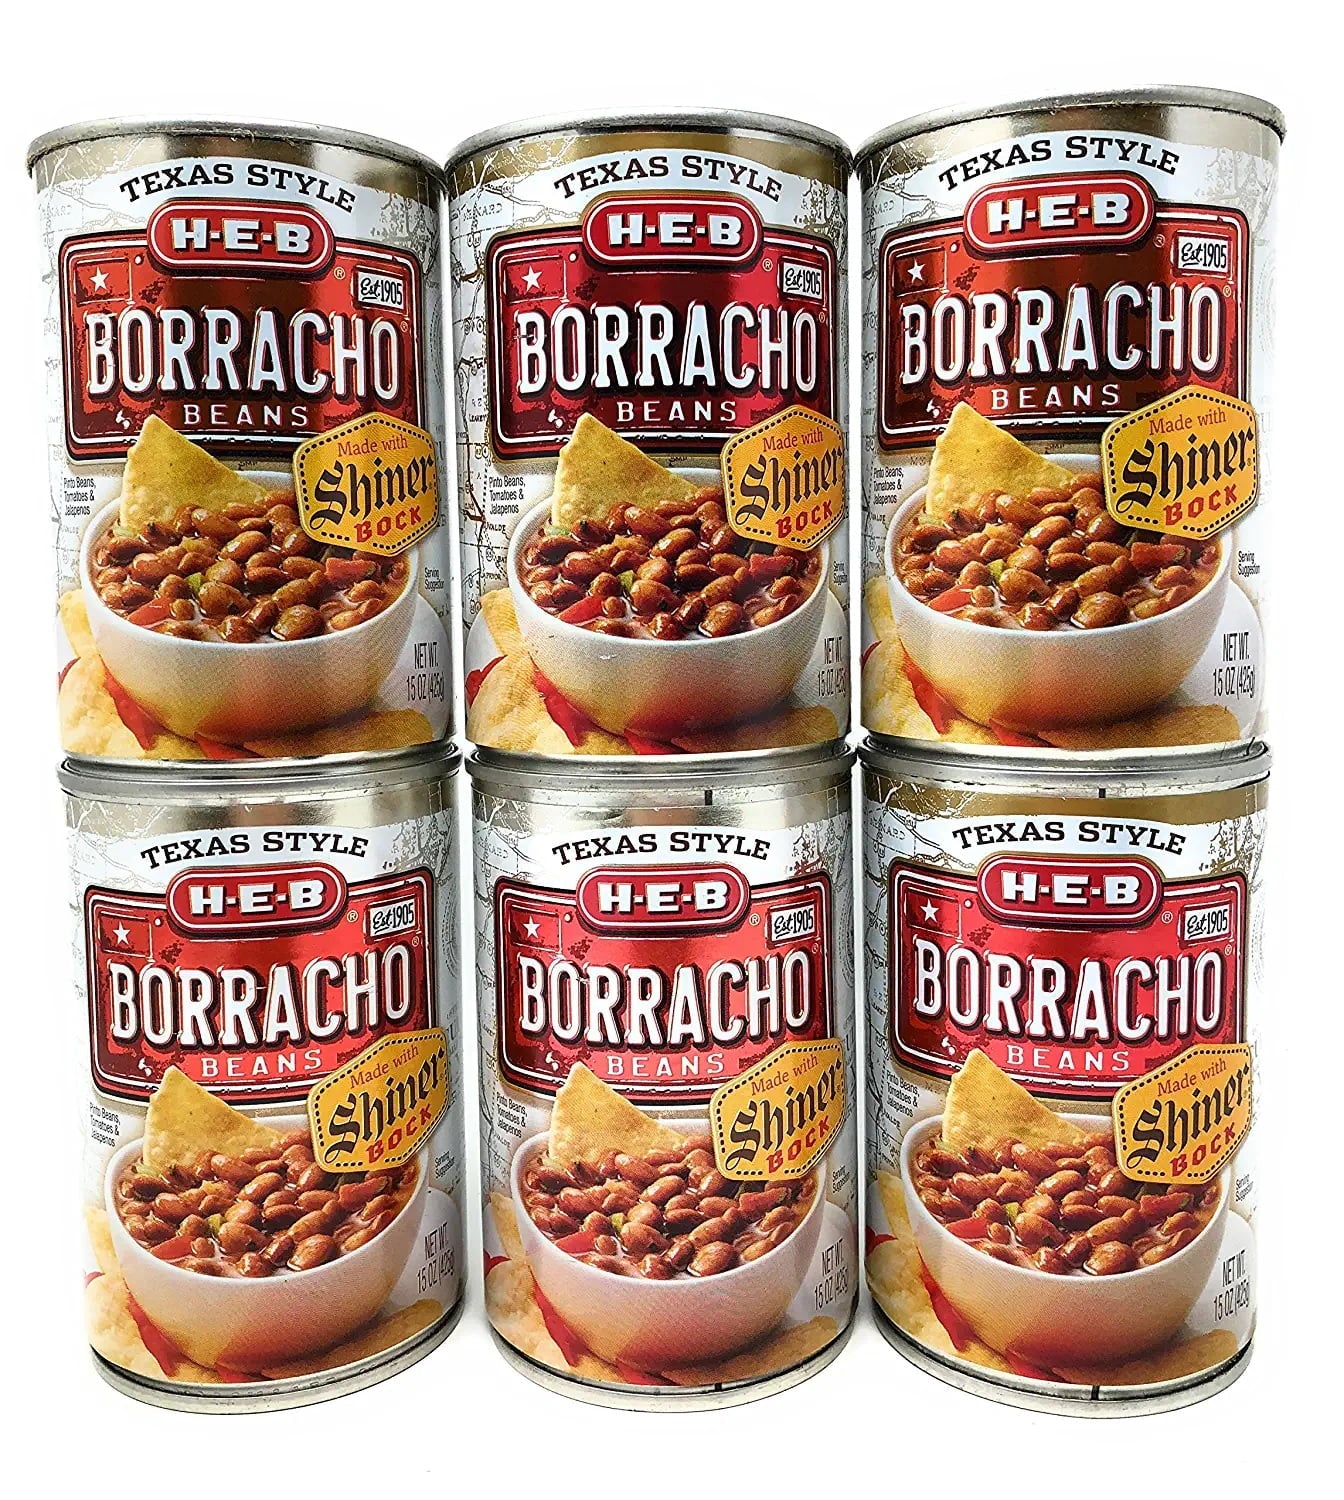 HEB Borracho Beans Made with Shiner Bock Beer 15oz (Pack of 6)